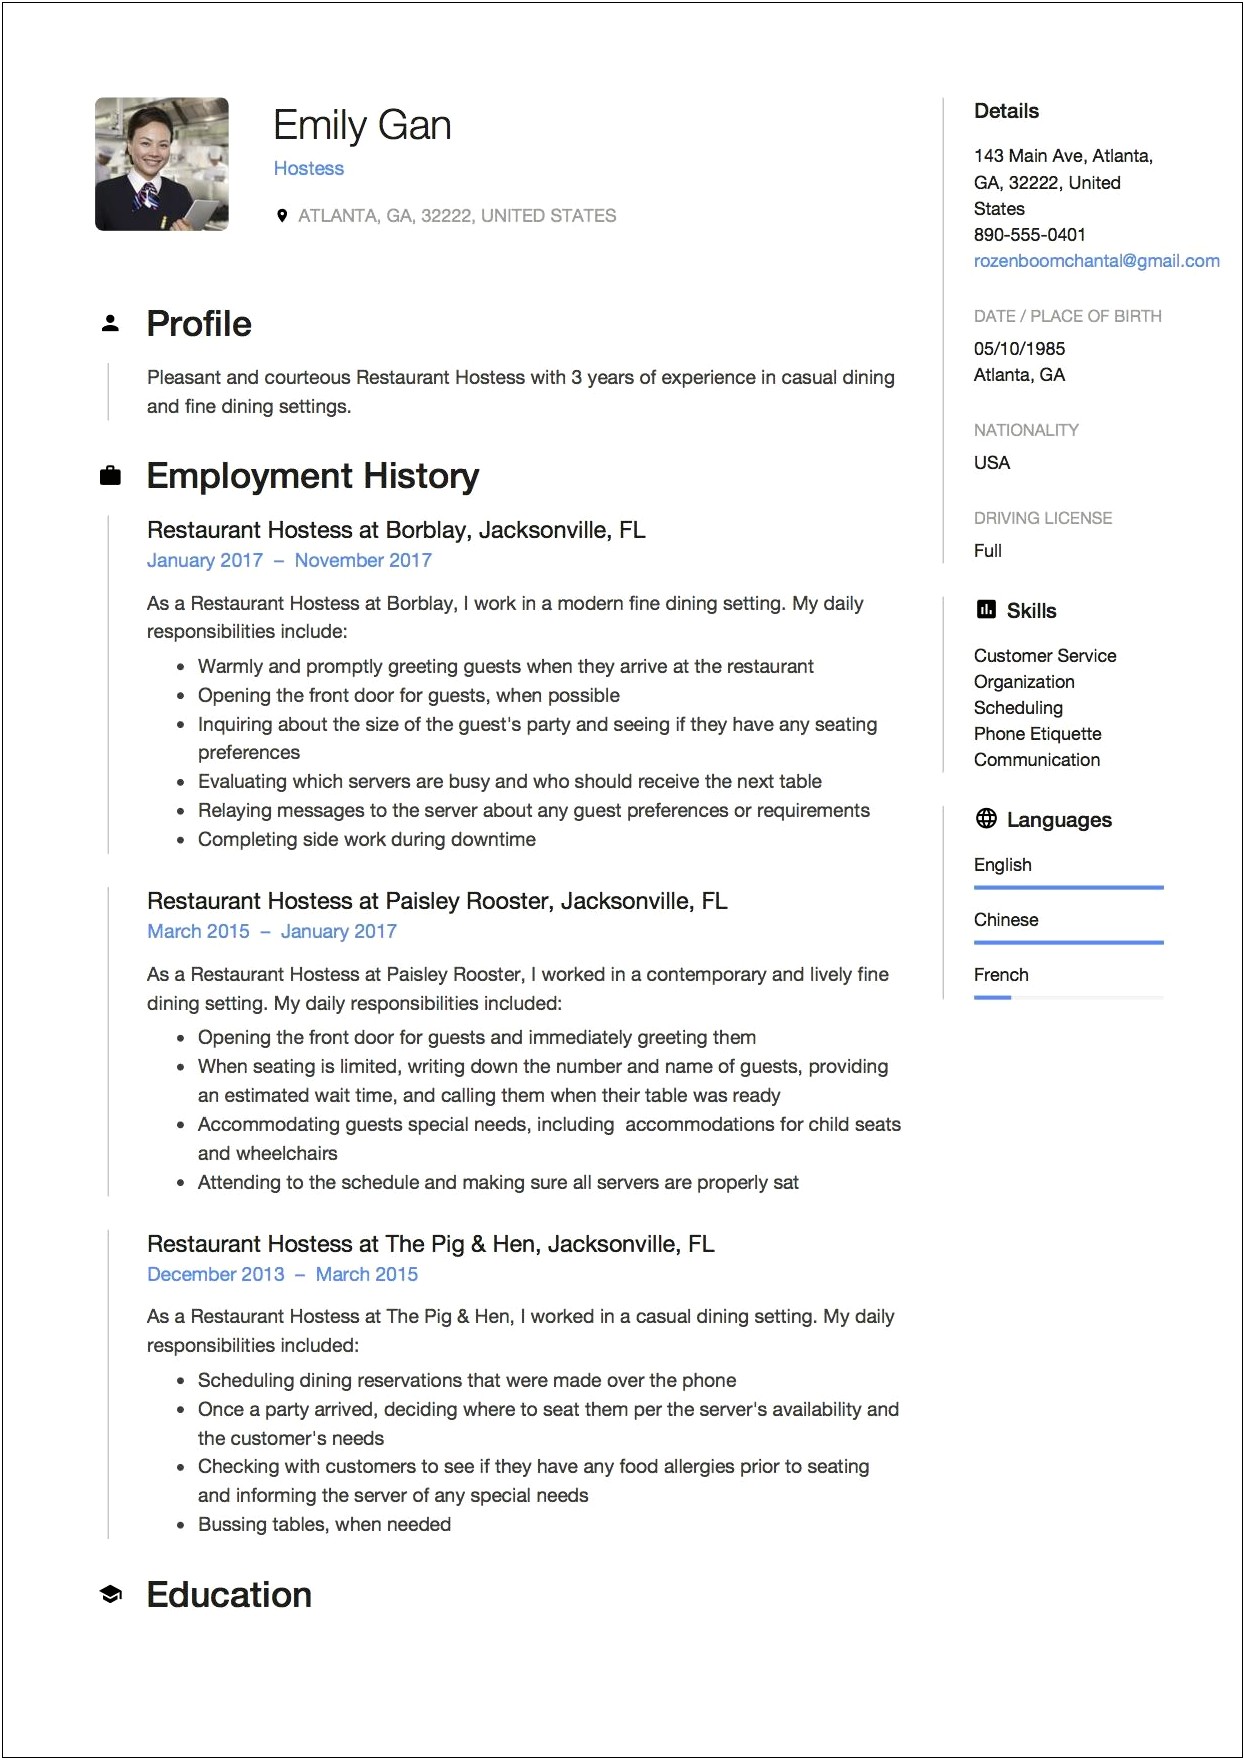 Resume Examples For Hostess Hotel Jobs